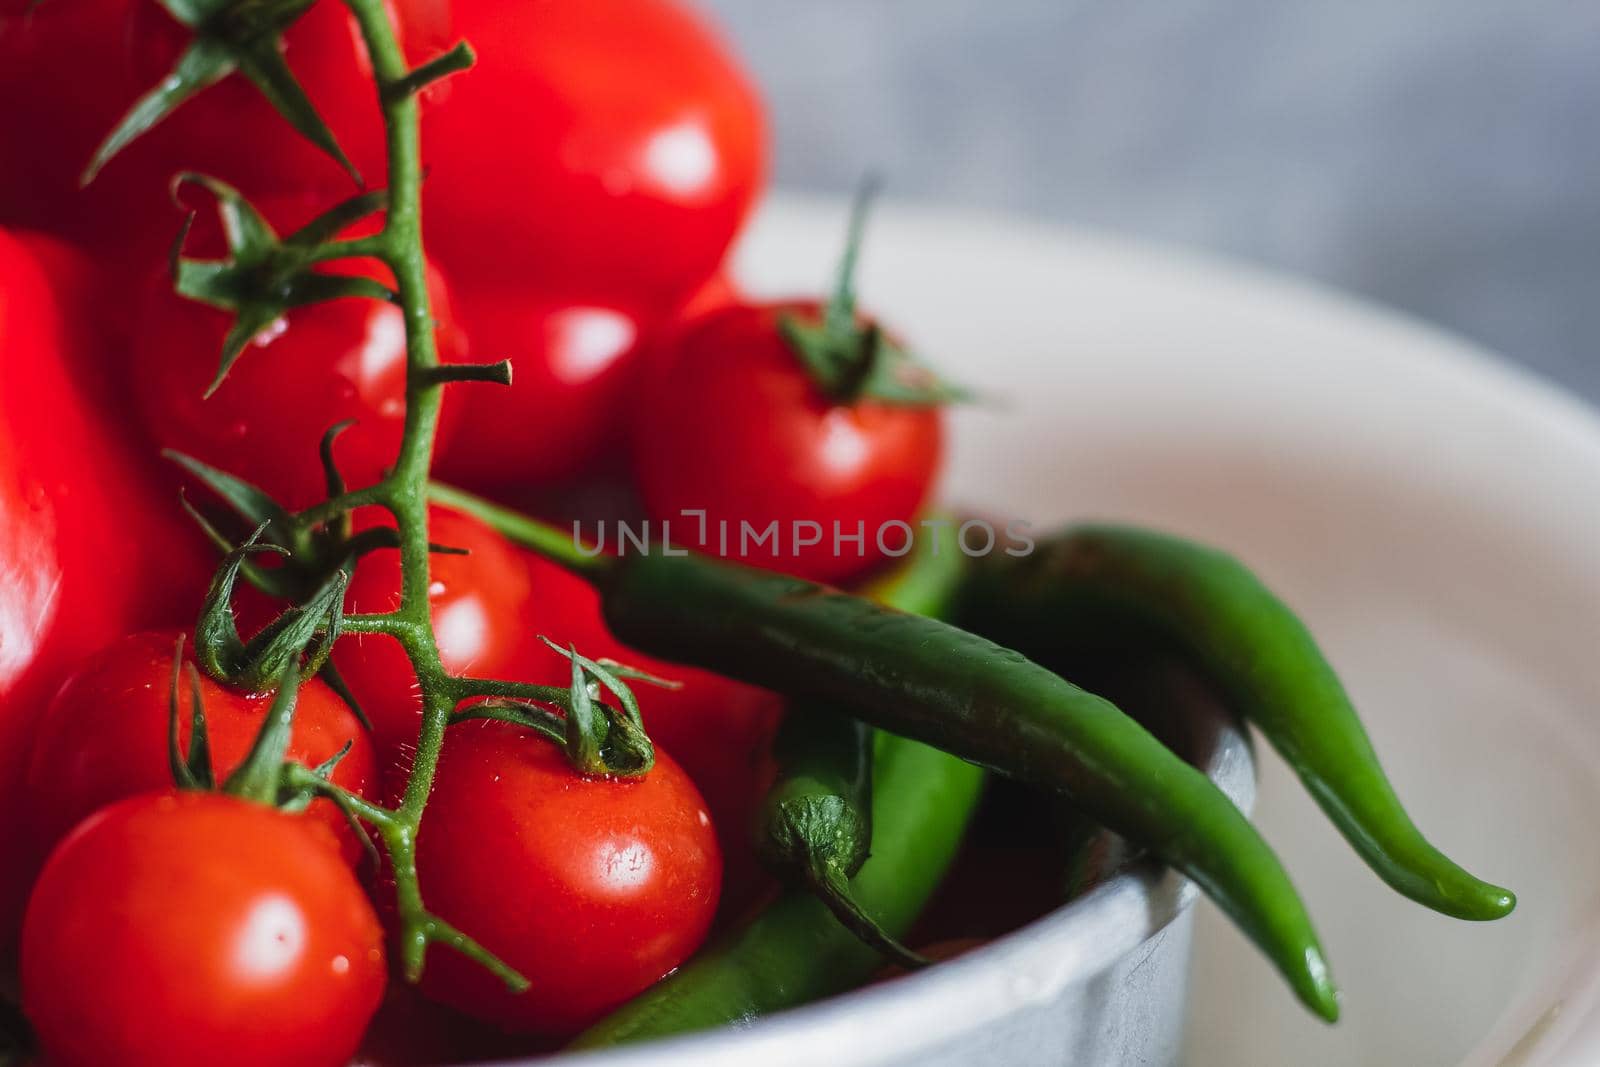 Juicy bright mature cherry tomato close-up large long peppers hot chili pepper green red